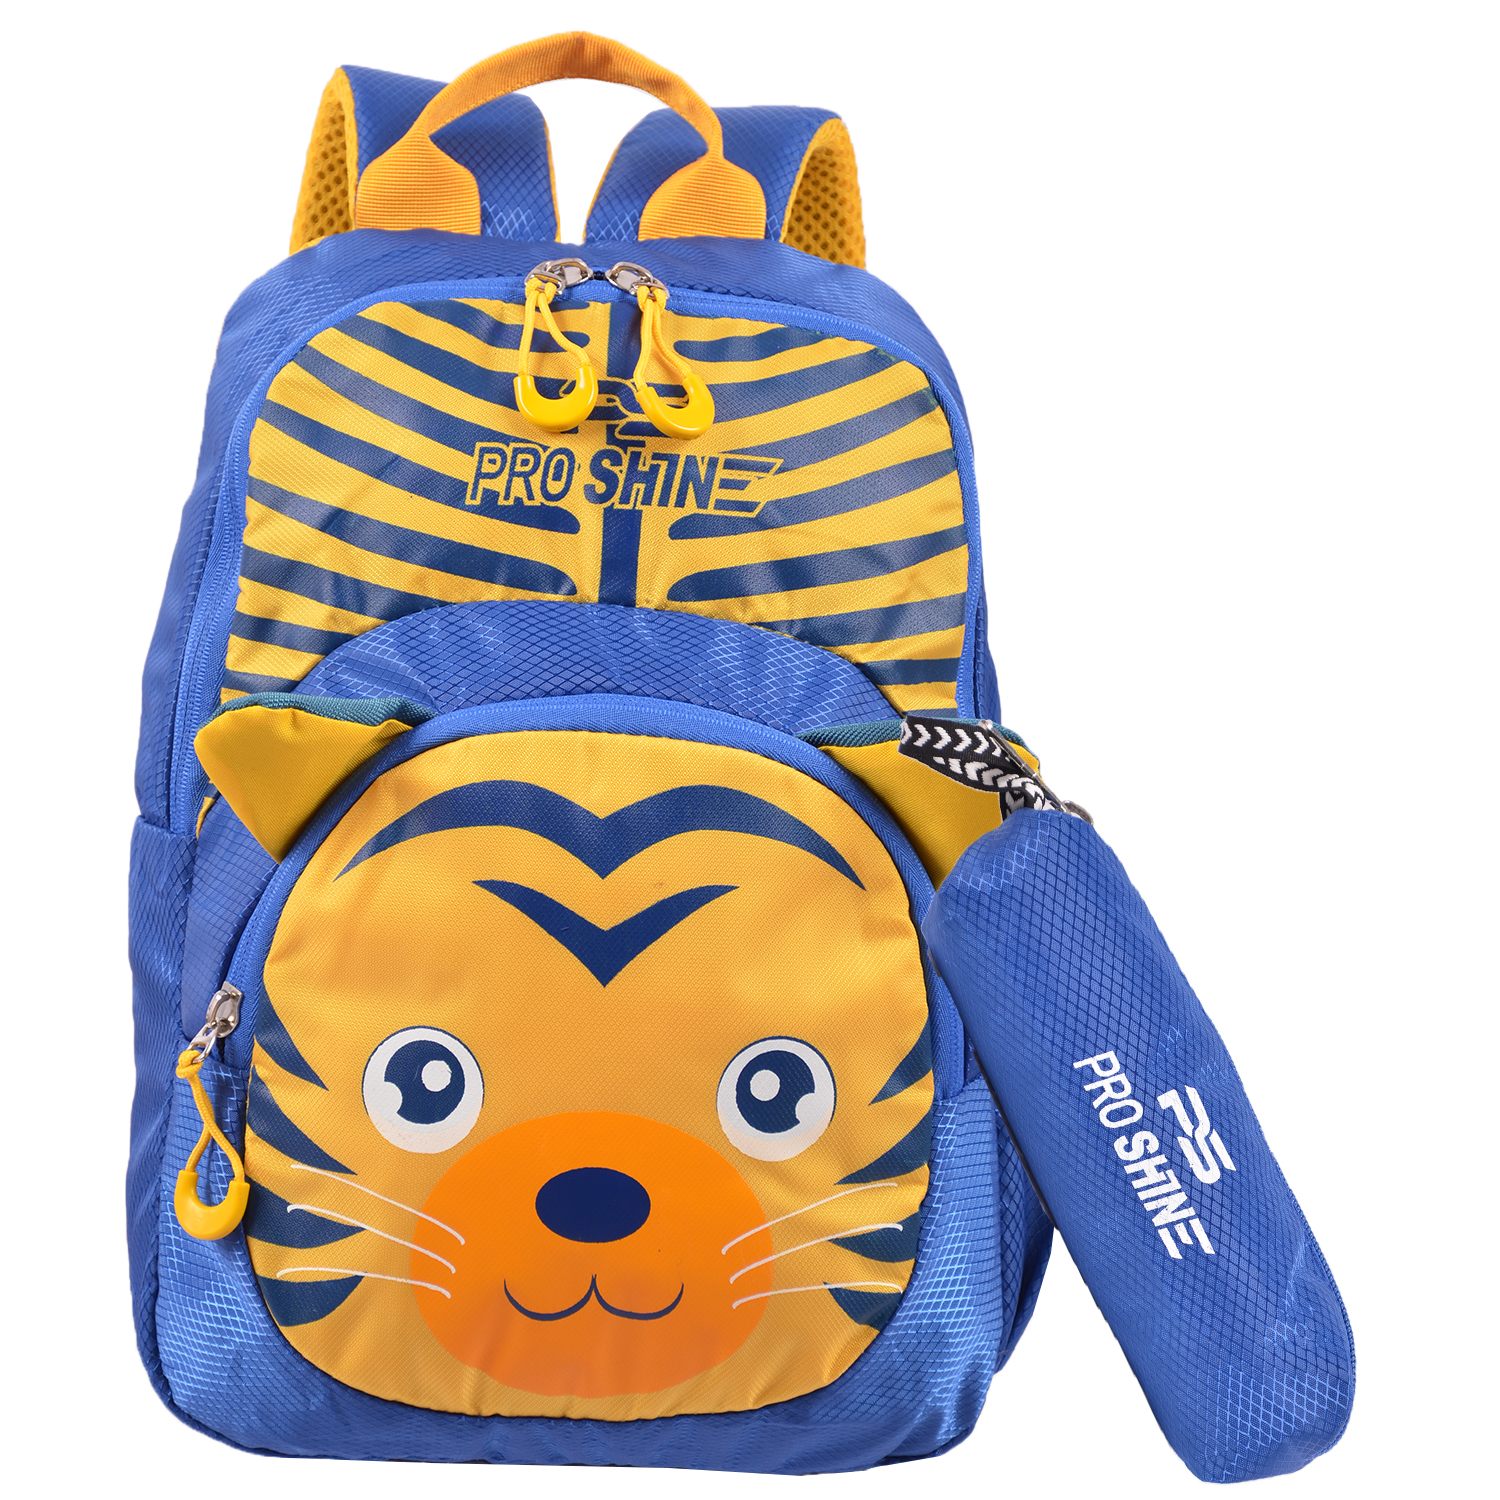 RoshanBags_PROSHINE 14L KIDS SCHOOL BAG FOR KG WITH POUCH A0138 YELLOW BLUE